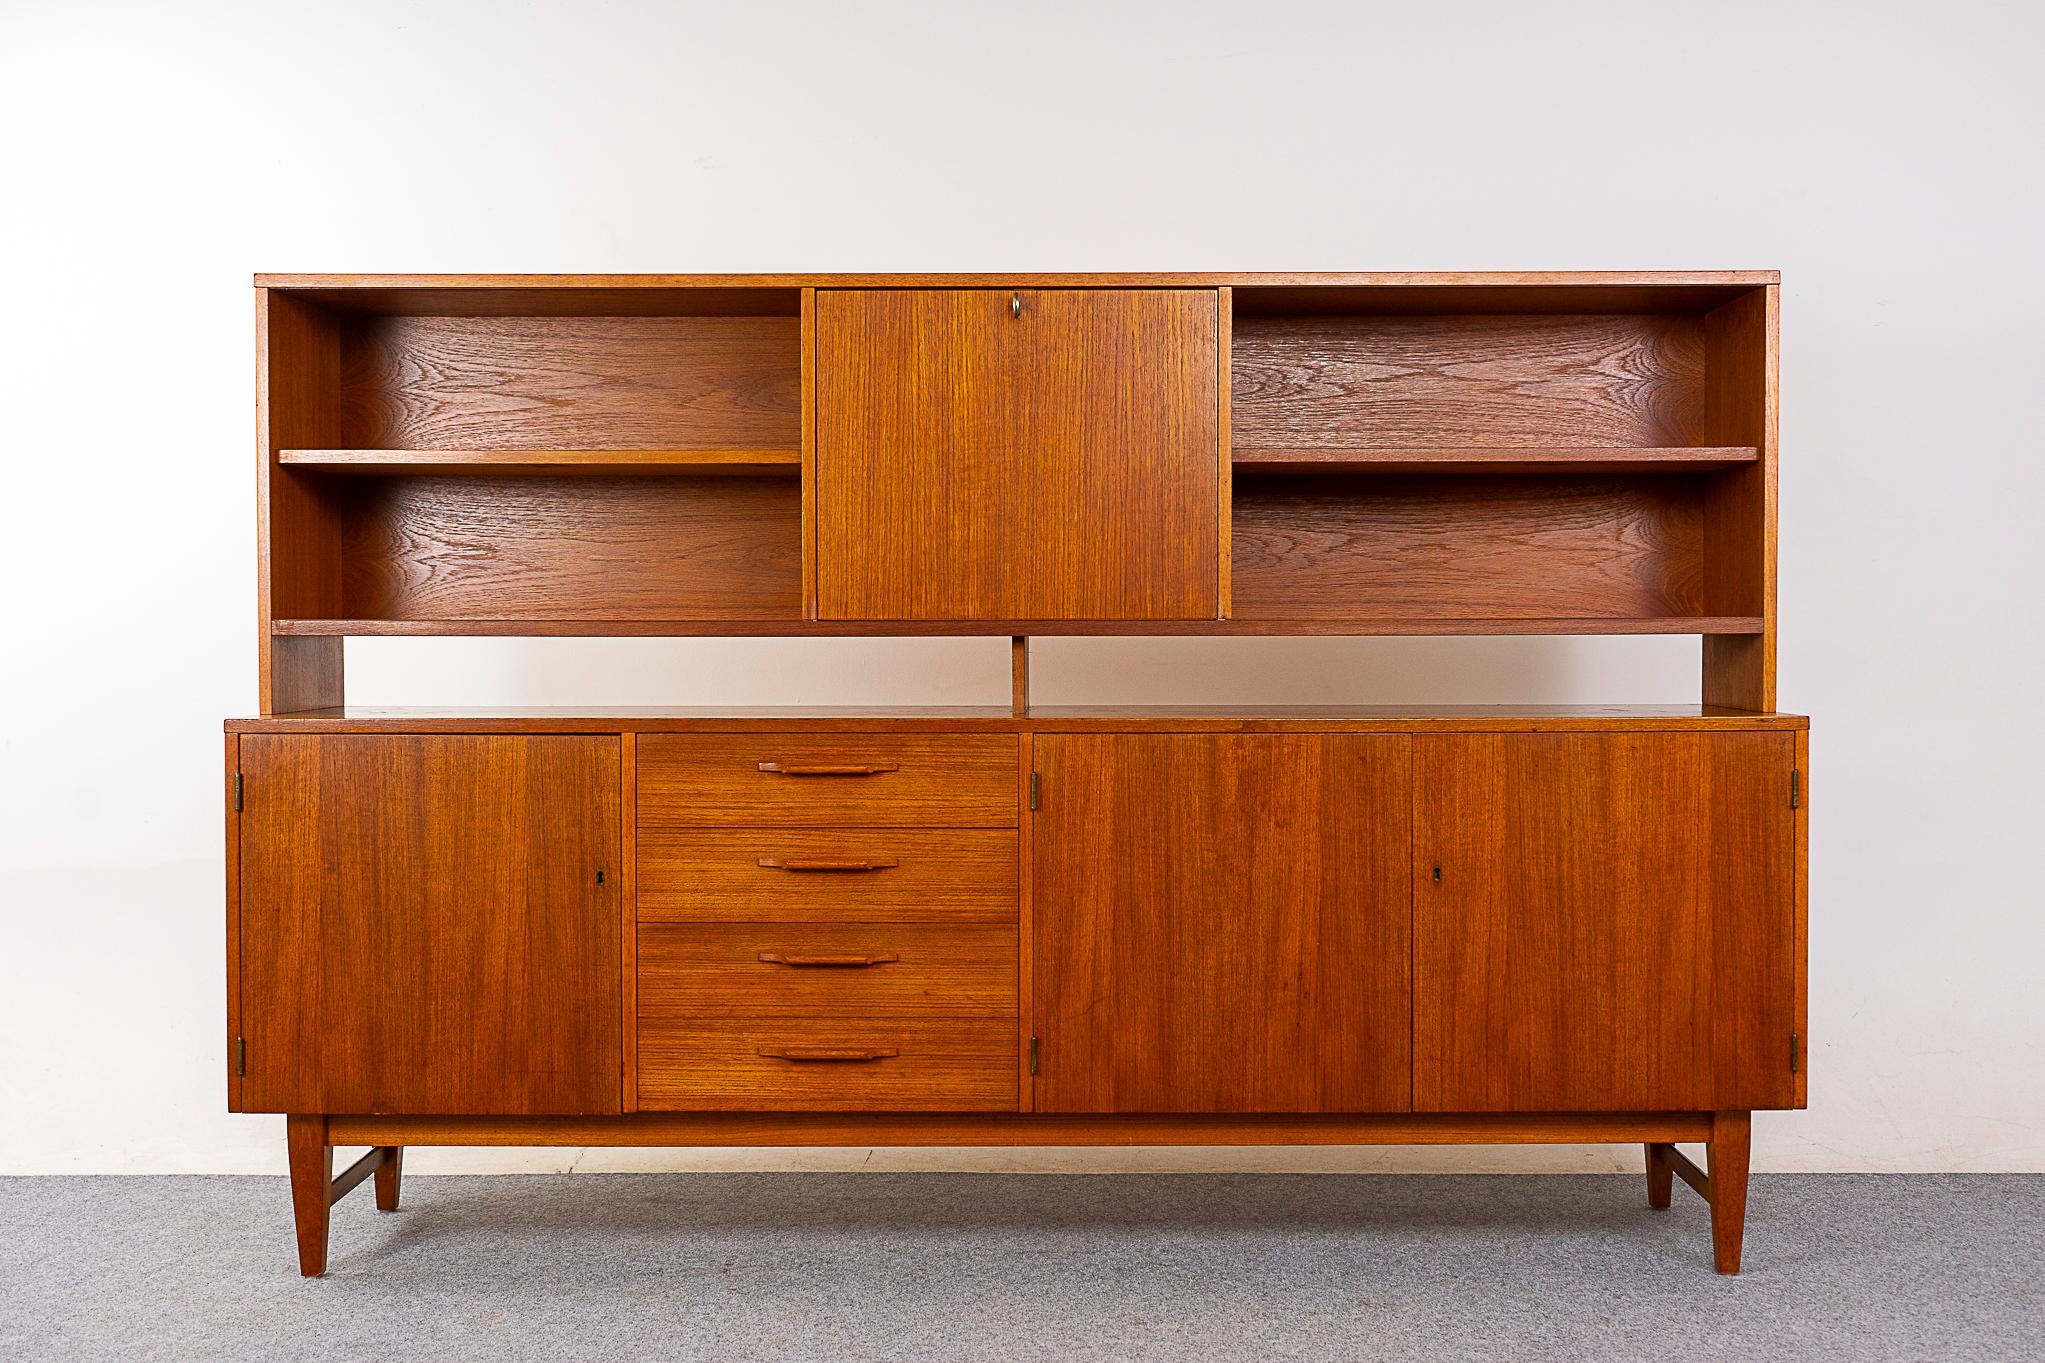 Teak sideboard & hutch, circa 1960's. Mirrored bar and open cubbies up top, glass sliding door can be added. Locking doors, removable shelving and felt lined drawers.  Top and bottom can be used independently. AB AJFA Mobelfabrik maker's mark